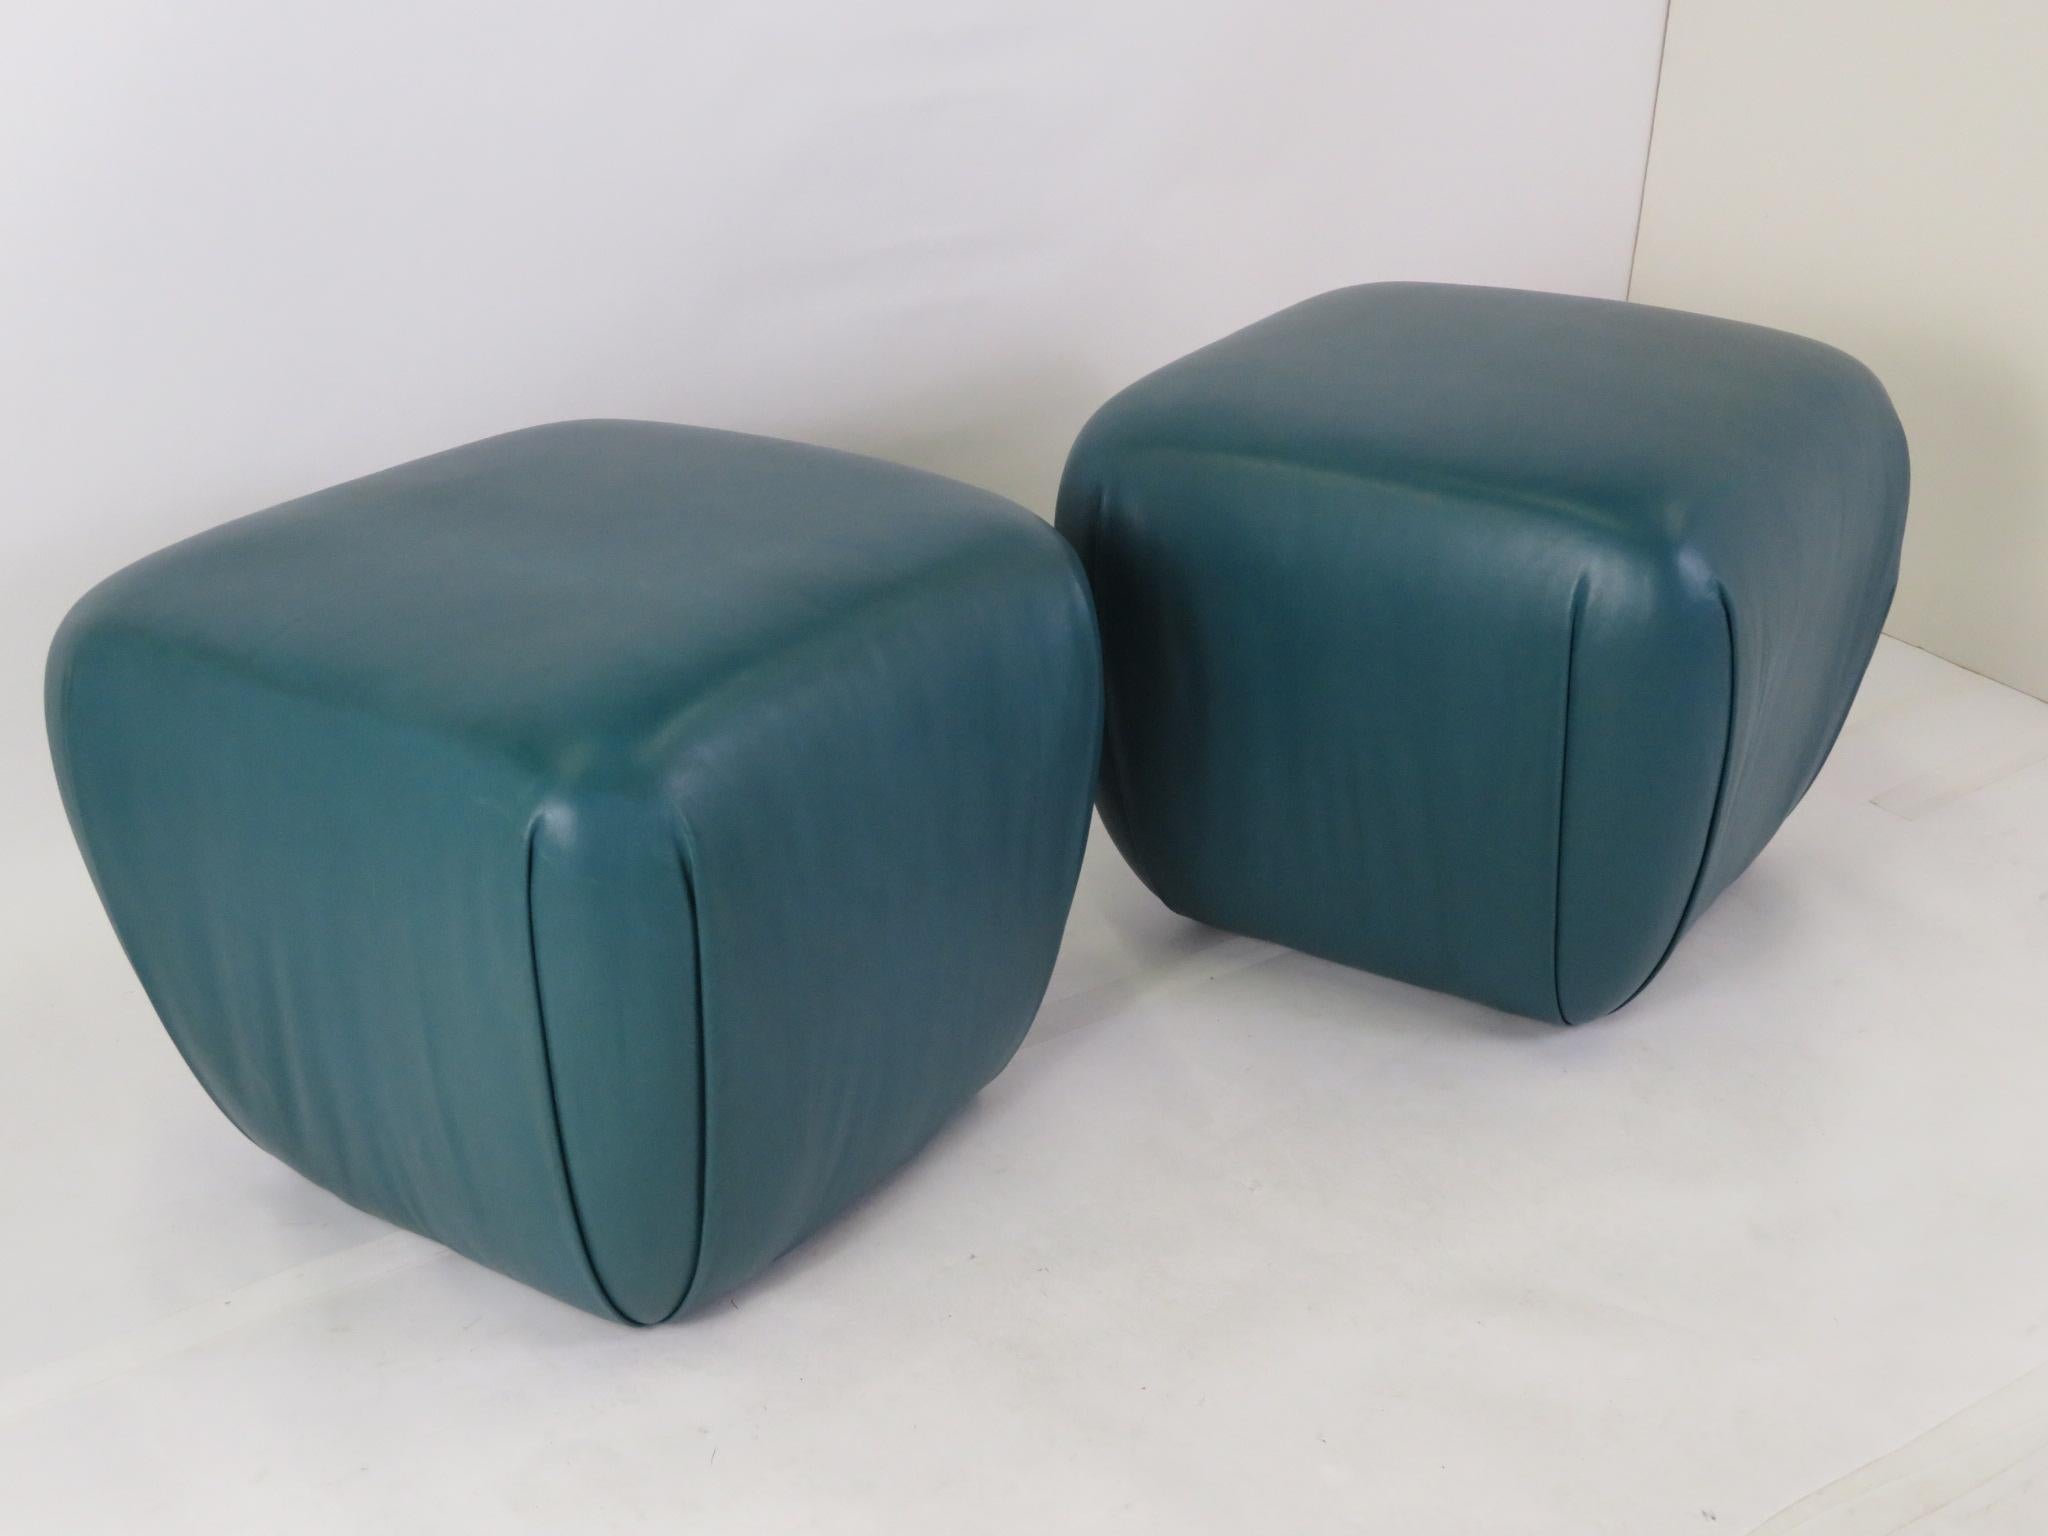 Late 20th Century Modern Pair of Teal Leather Ottomans Stools in the Style of Karl Springer, 1980s